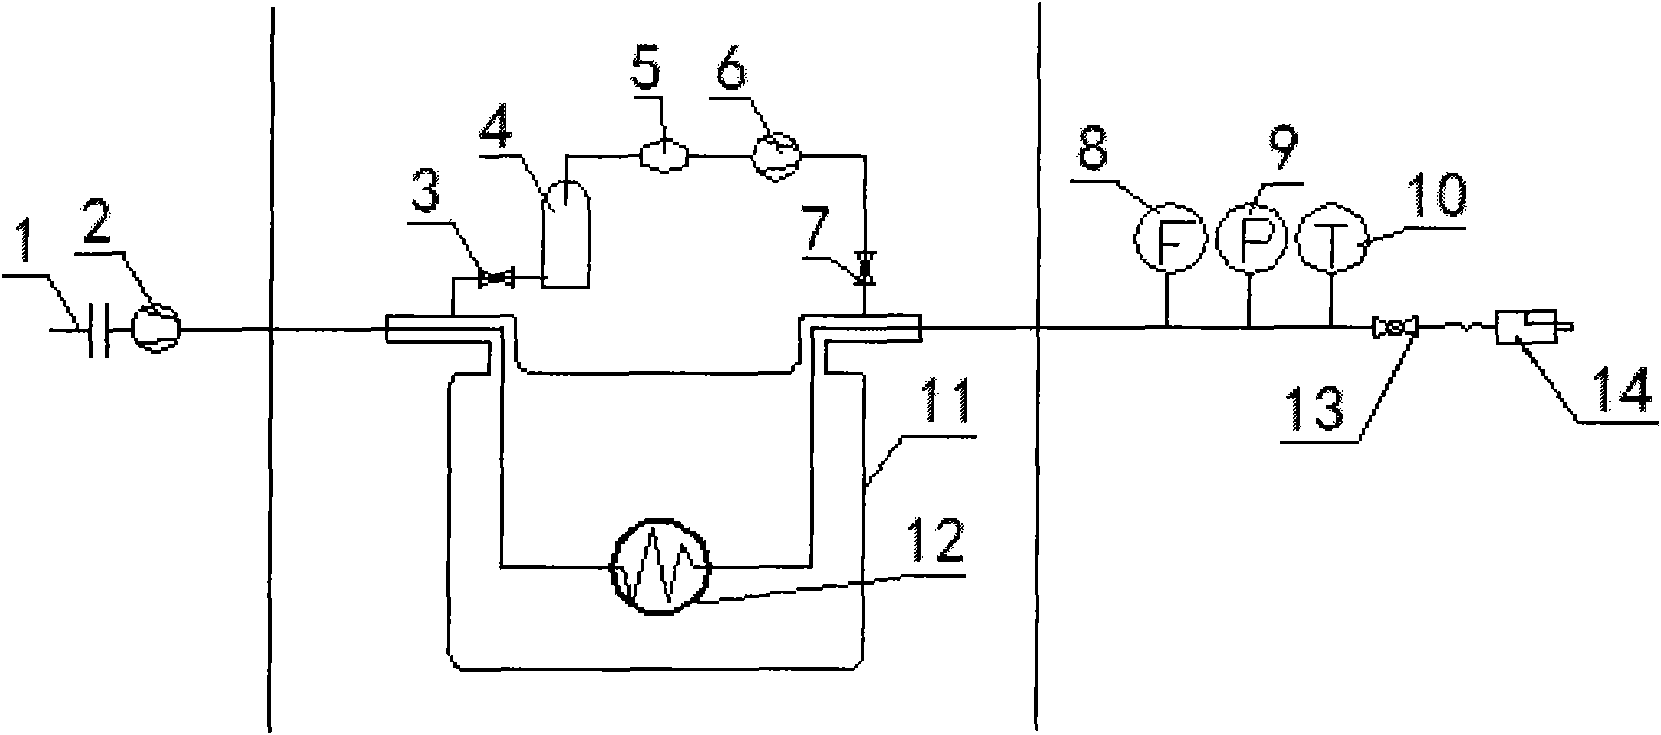 Cooling and filling method for hydrogen fuel used for vehicle